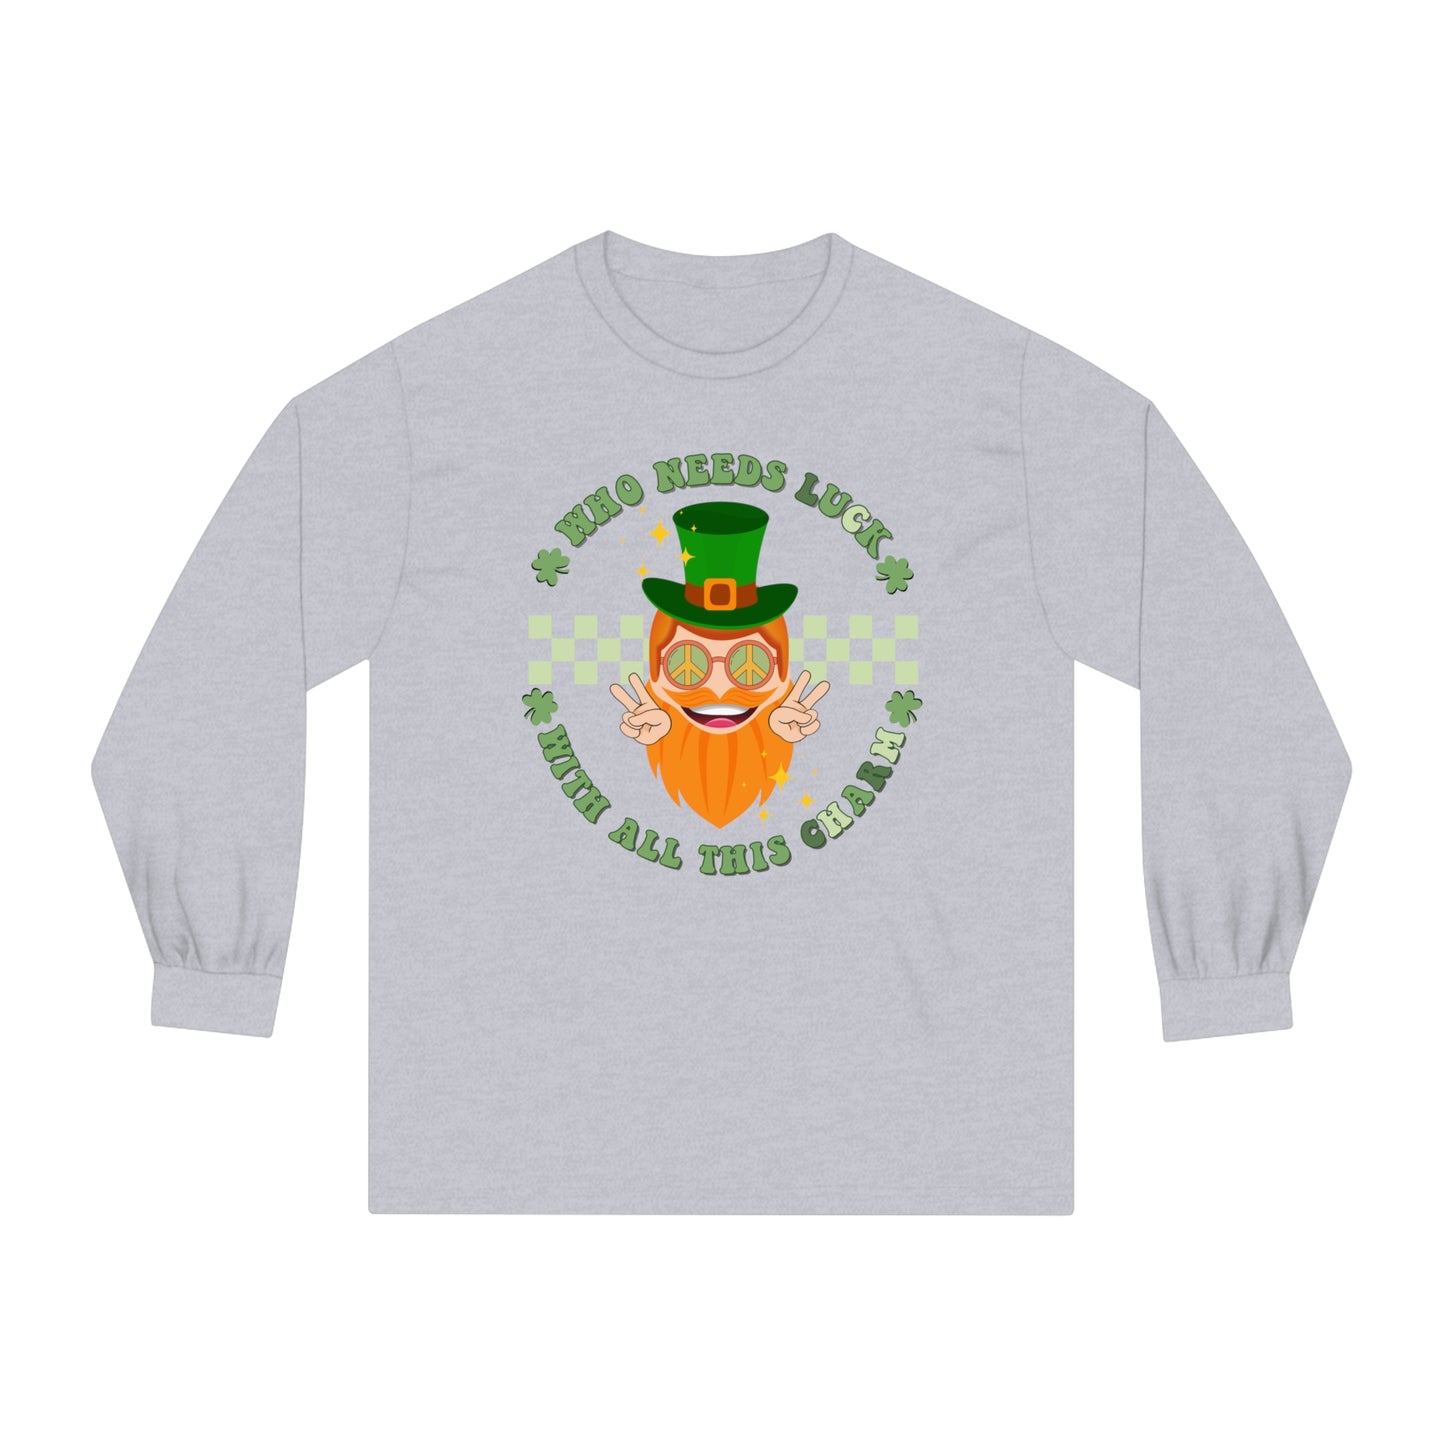 Who needs Luck with all this Charm - Unisex Classic Long Sleeve T-Shirt